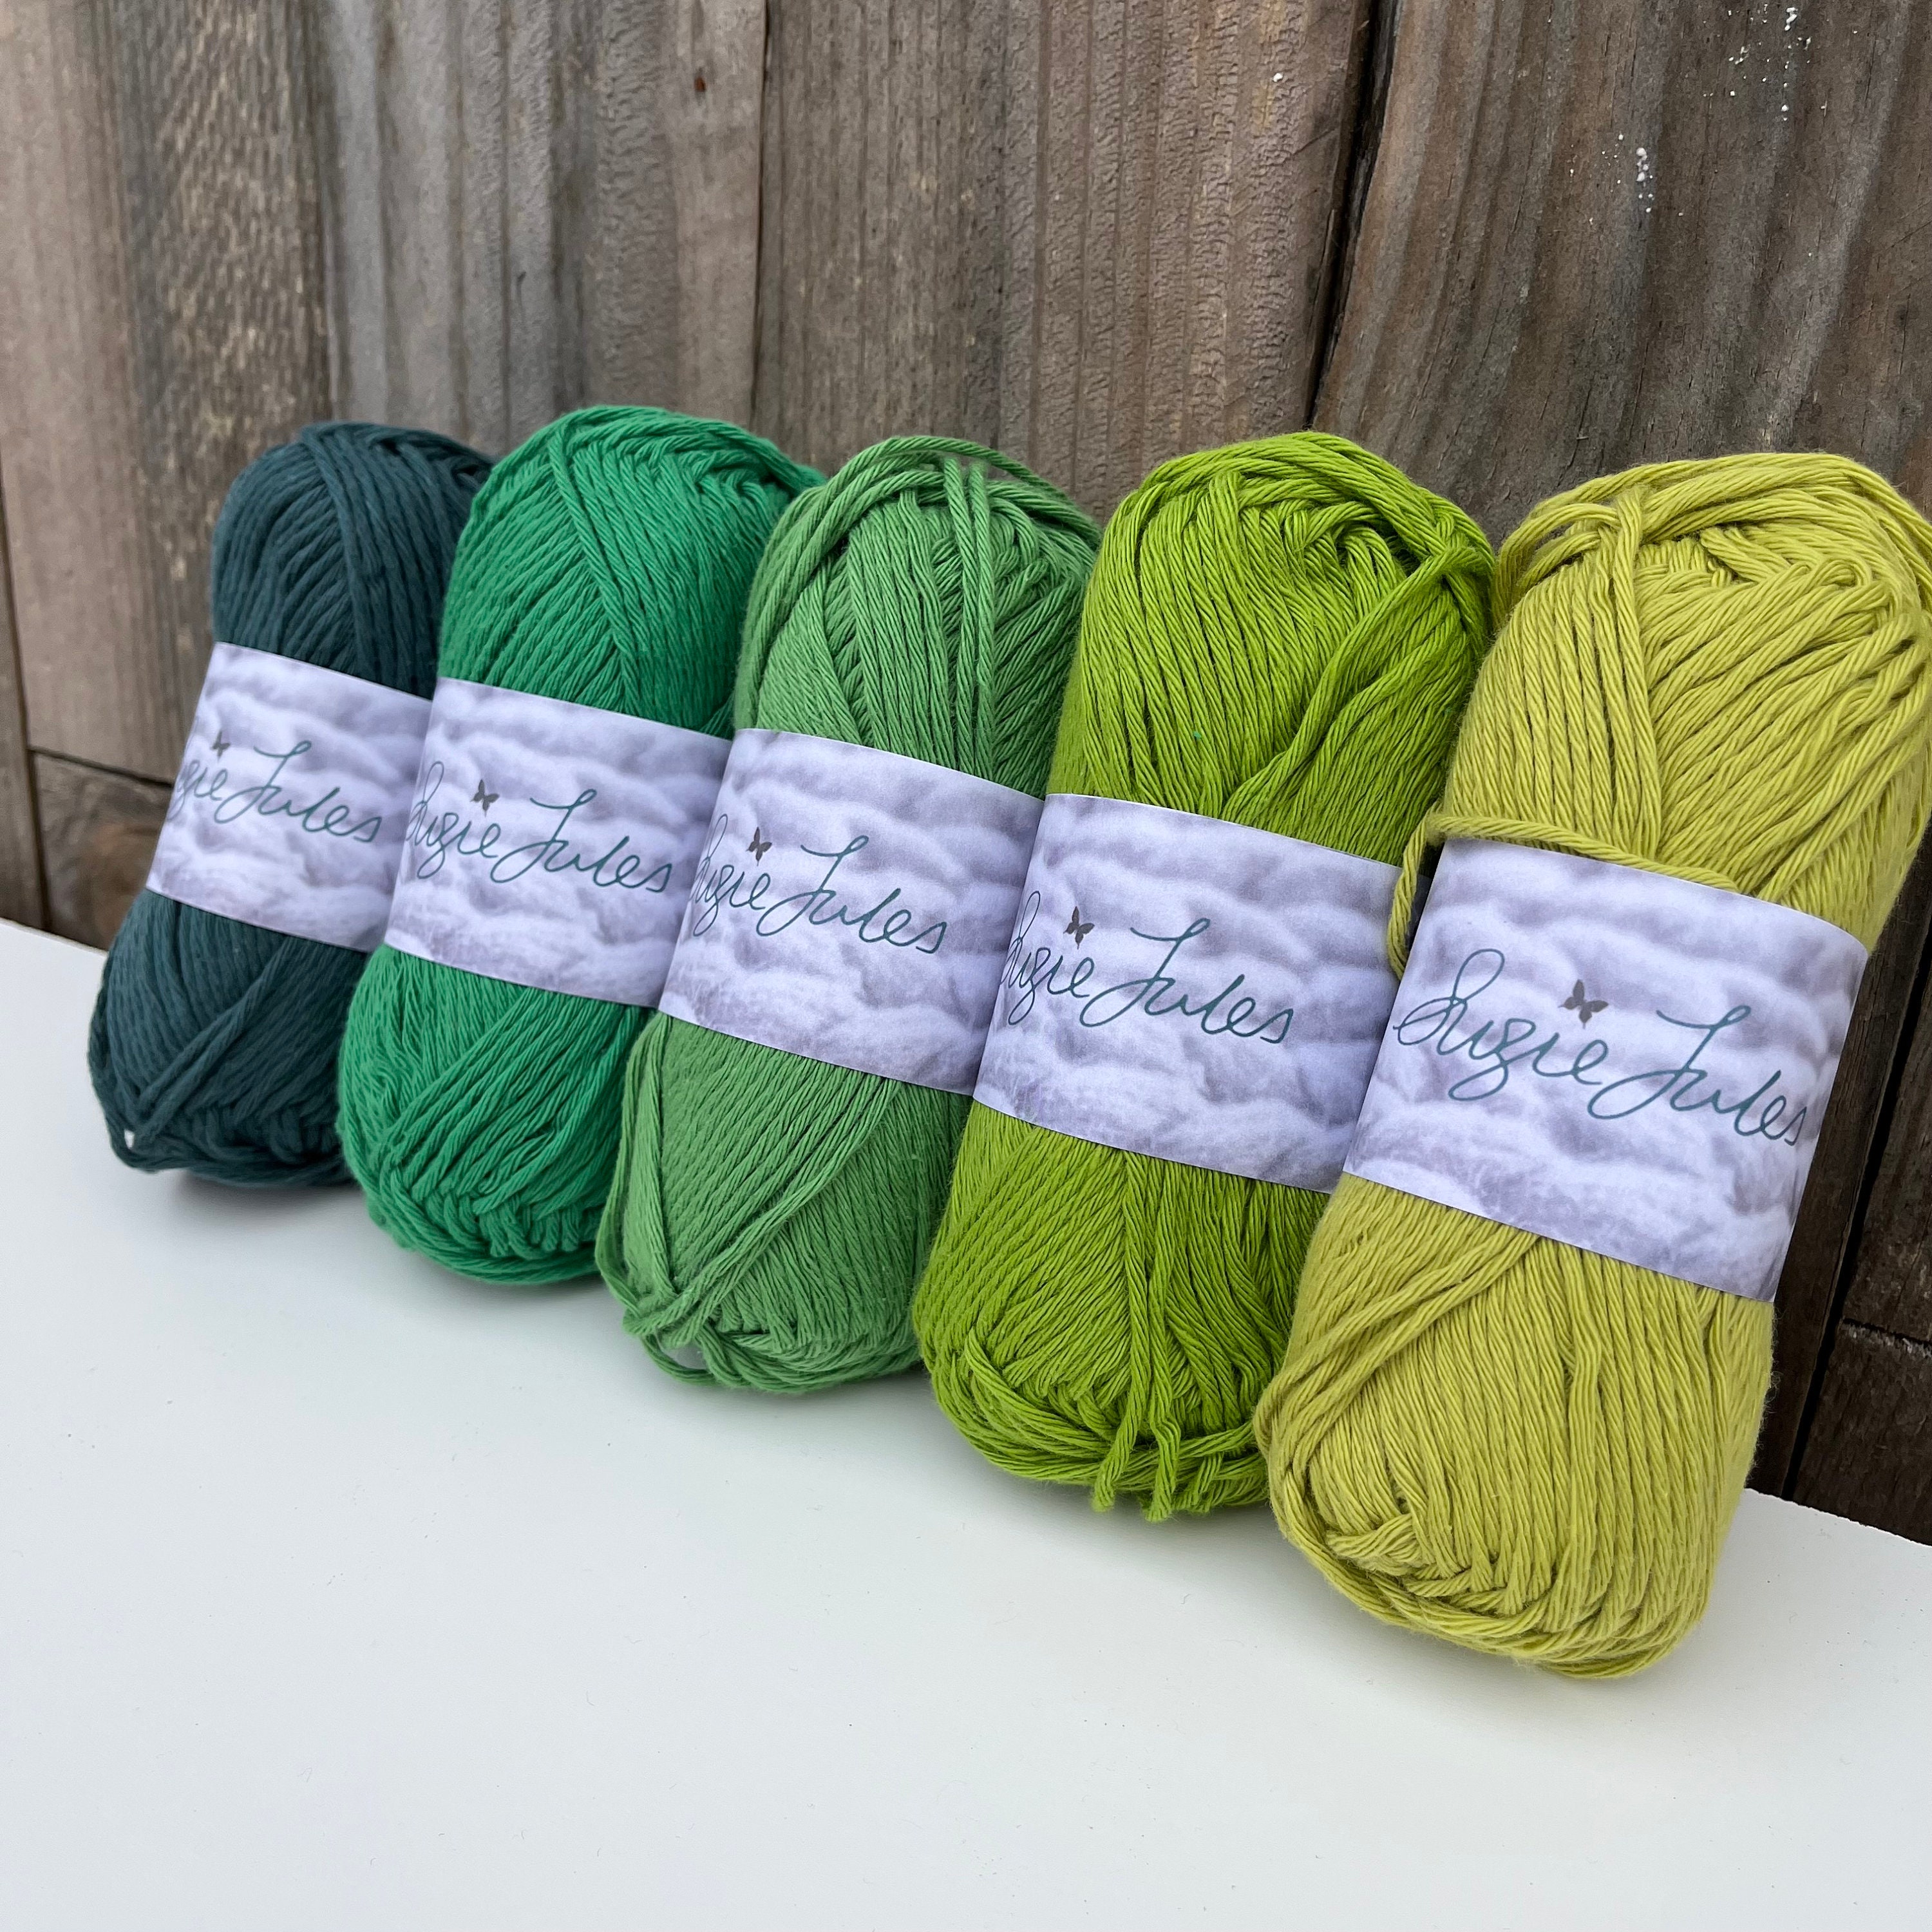 5 Skein Colour Pack of 100% Cotton in an Ombre of Greens - Etsy